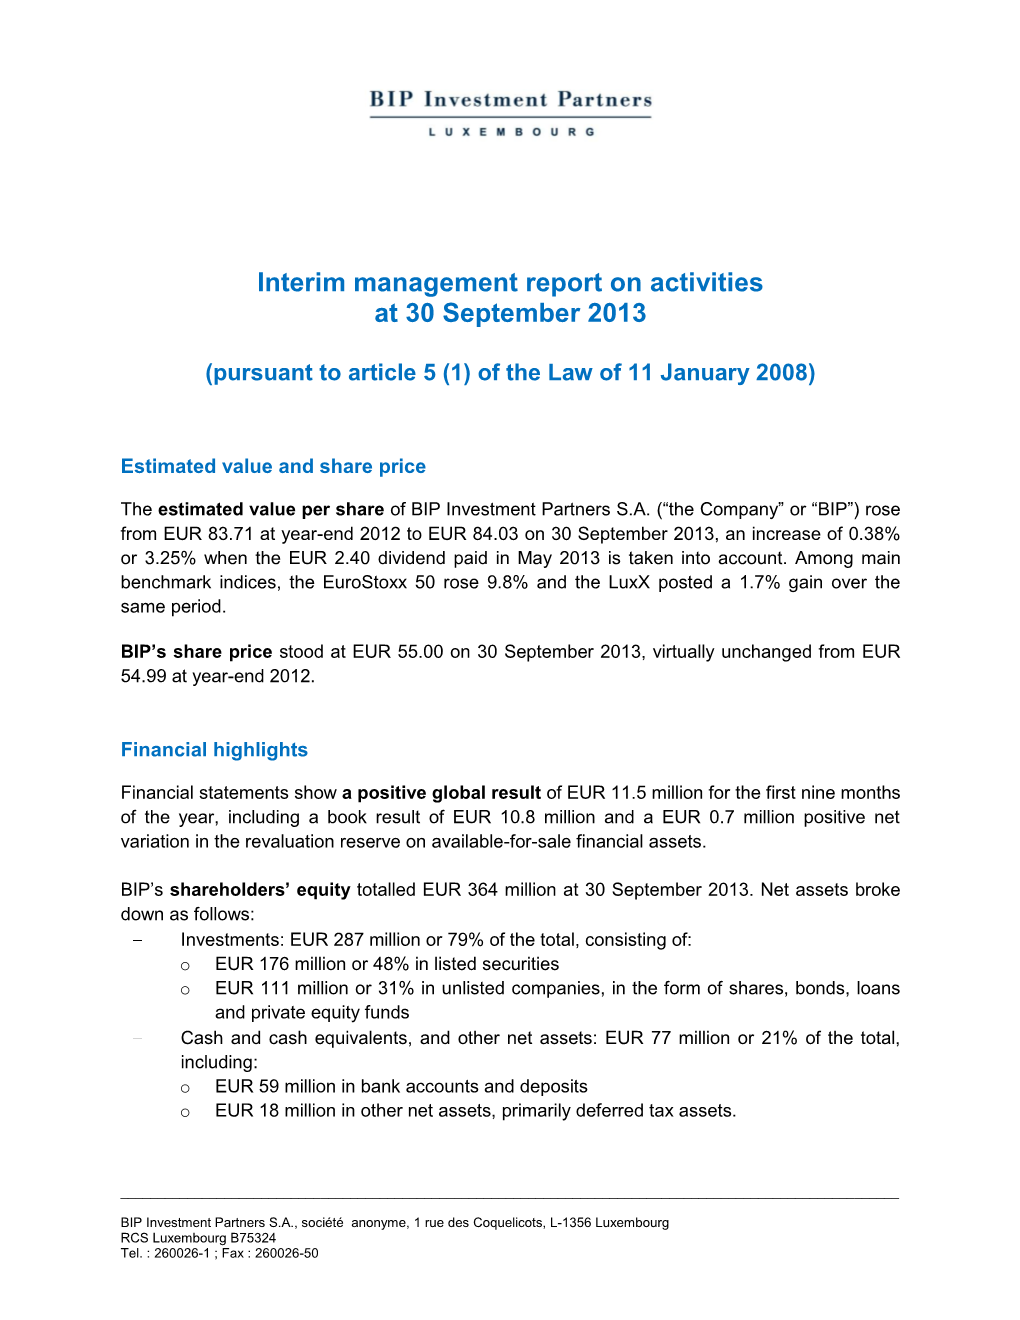 Interim Management Report on Activities at 30 September 2013